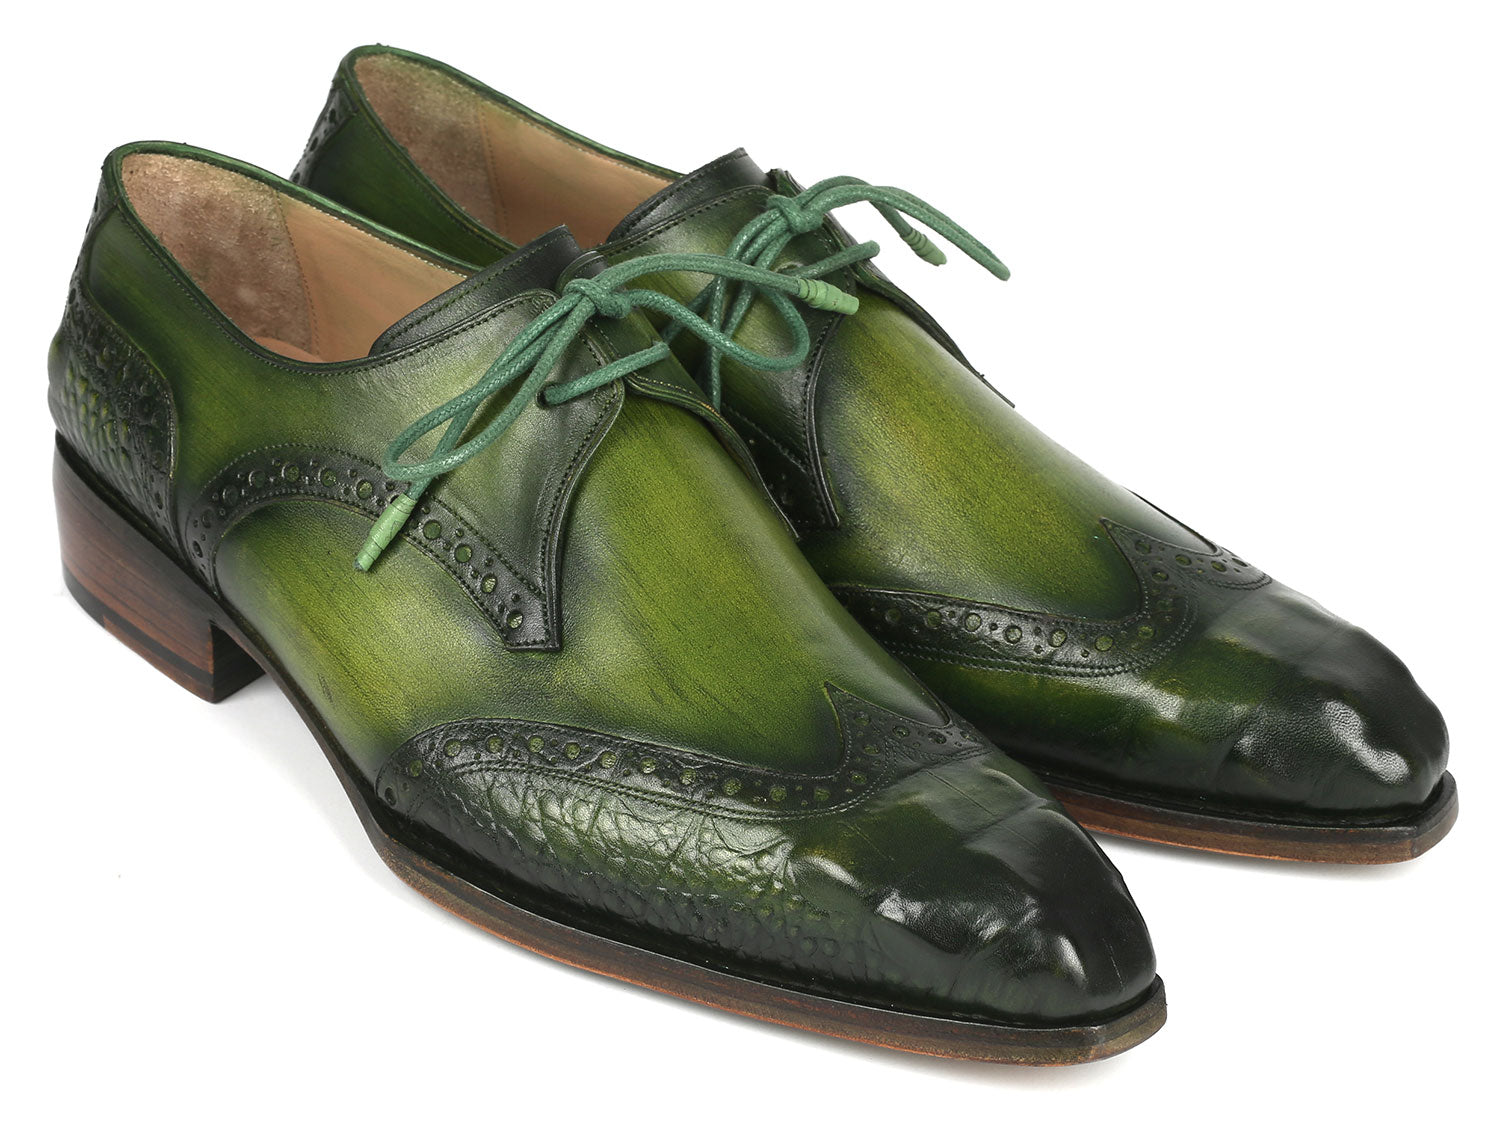 Paul Parkman Goodyear Welted Wingtip Derby Shoes Green - 584-GRN